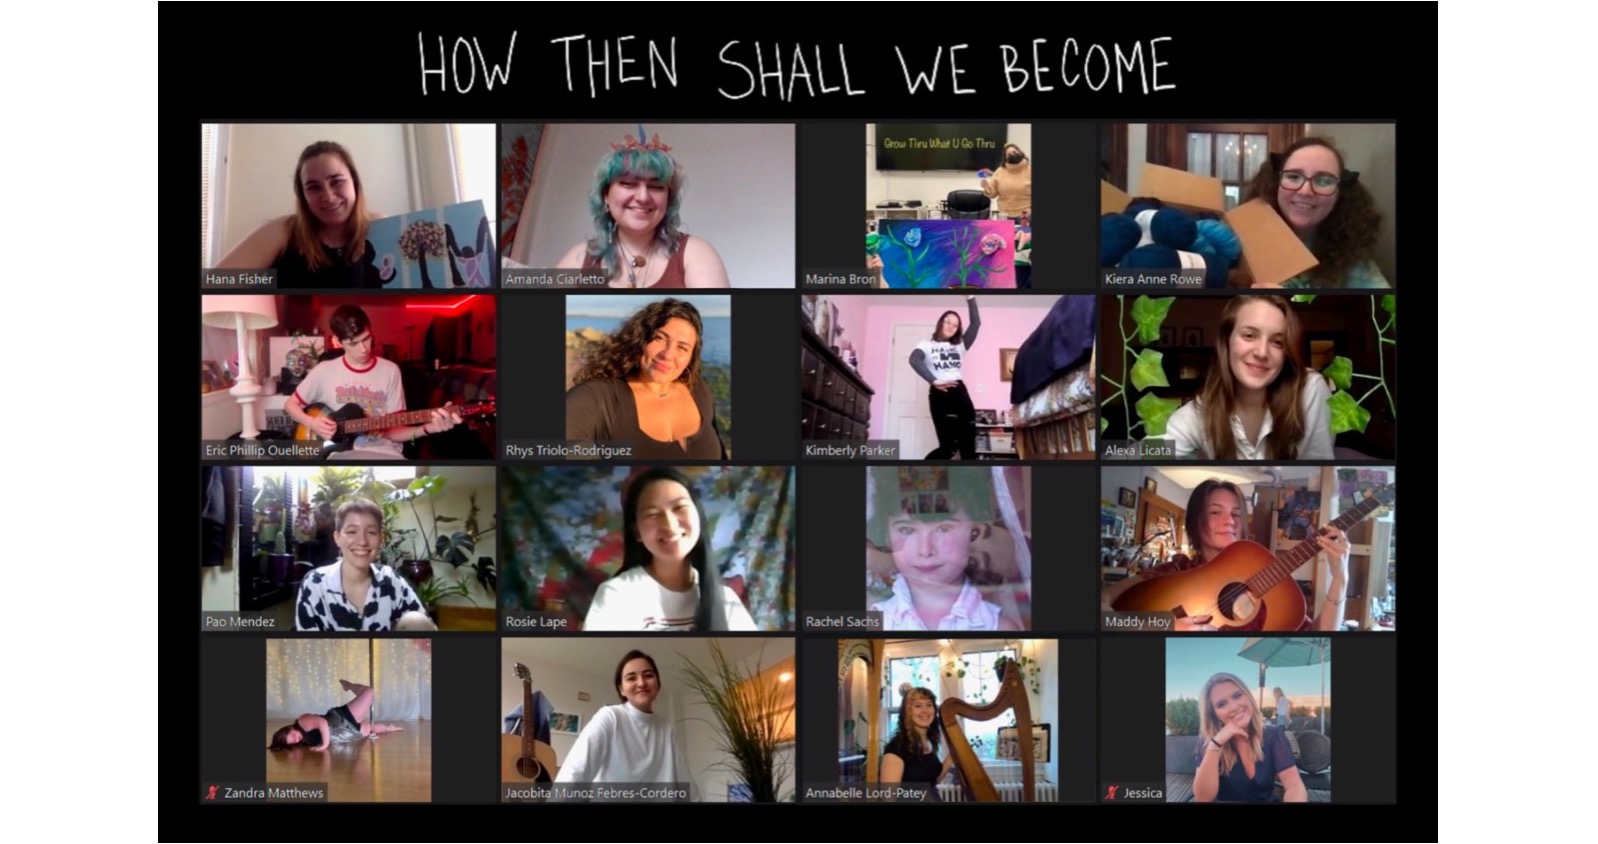 Screenshot of the class on Zoom, with the title "How Then Shall We Become." Showing the following students: Hana Fisher, Amanda Ciarletto, Marina Bron, Kiera Anne Rowe, Eric Phillip Oullette, Rhys Triolo-Rodriguez, Kimberly Parker, Alexa Licata, Pao Mendez, Rosie Lape, Rachel Sachs, Maddy Hoy, Zandra Matthews, Jacobita Munoz Febres-Cordero, Annabelle Lord-Patey, and Jessica